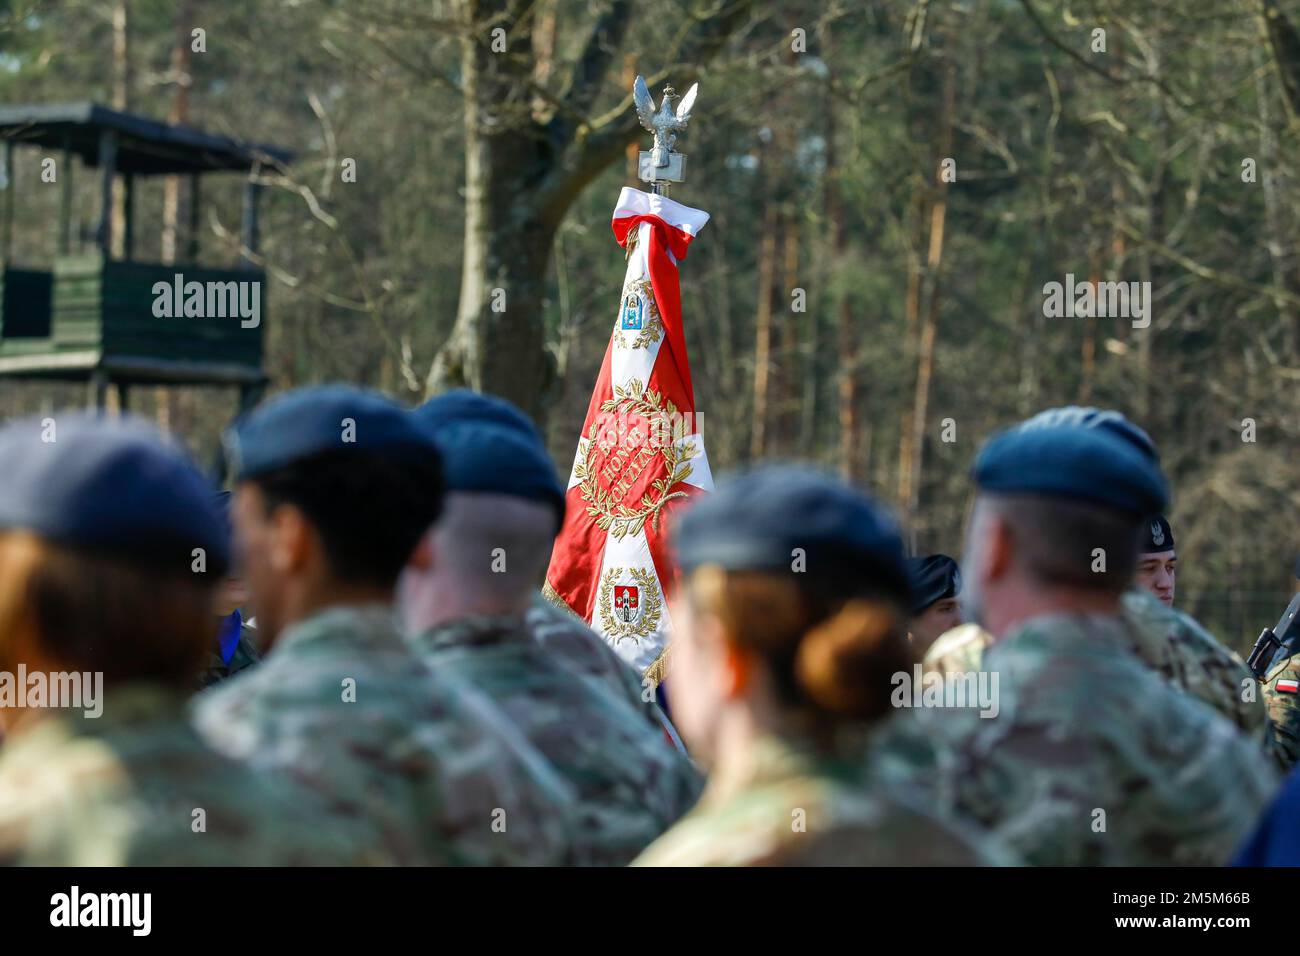 The flag of the Polish army stands during a commemoration of the escape attempt at Stalag Luft III at Zagan, Poland, March 24, 2022. Service members of various nations participated in the commemoration of what is known as the 'Great Escape,' an escape attempt orchestrated by British Royal Air Force airmen from a German prisoner of war camp in Zagan during World War II and ended in the execution of 50 recaptured prisoners. Stock Photo